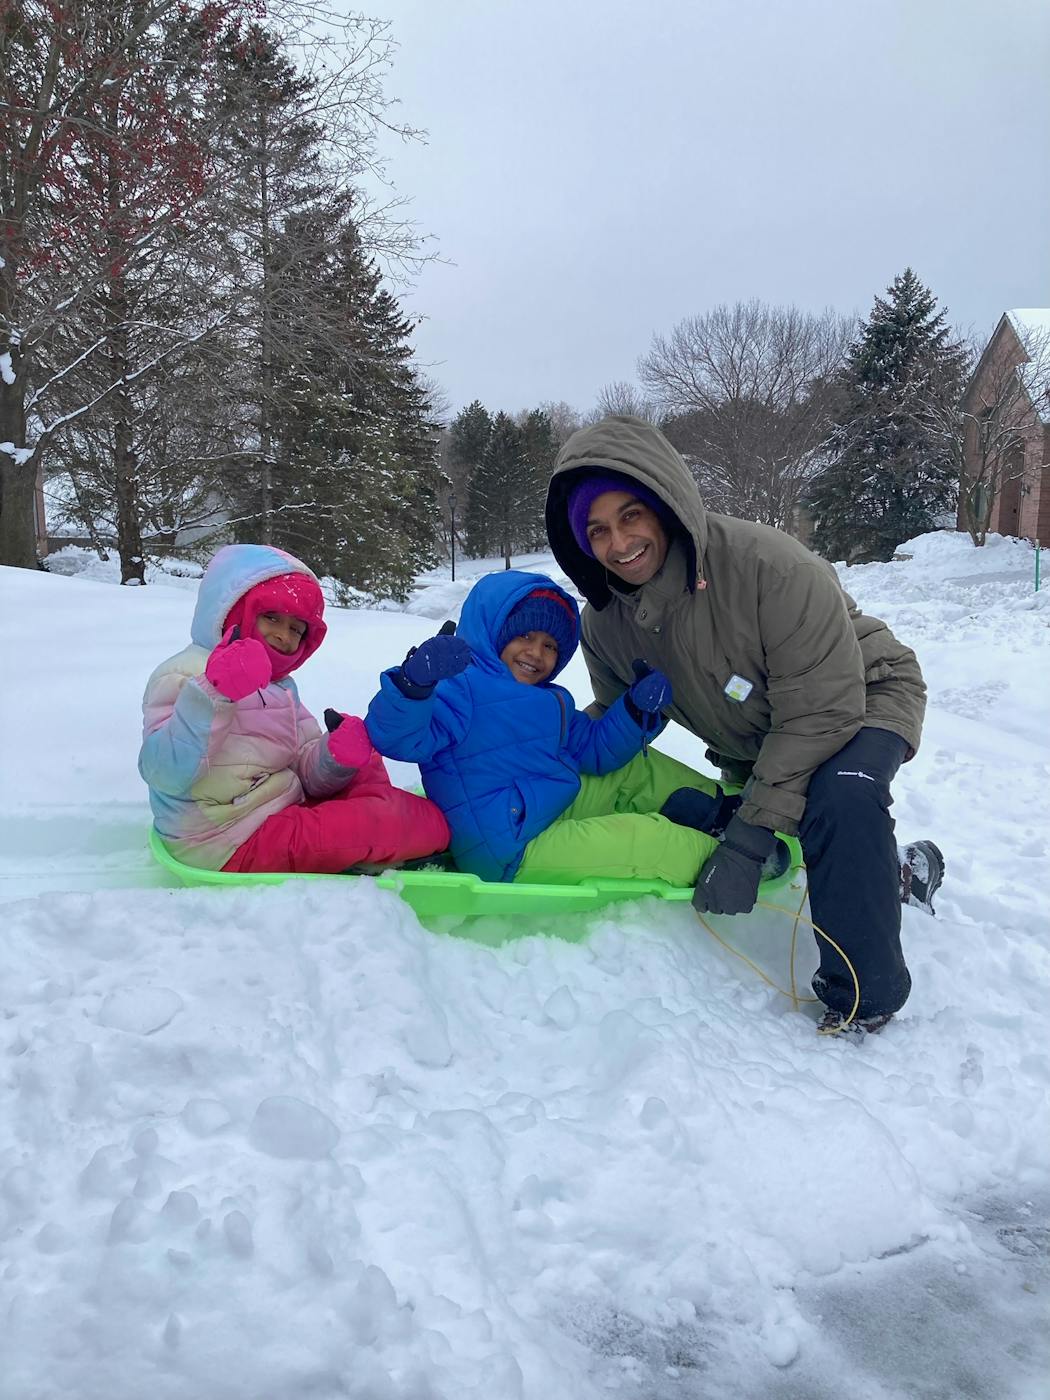 Dr. Krish Subrahmanian, a pediatrician at Hennepin Healthcare, modeled proper winter layering while sledding with his kids, Leela and Kiaan.